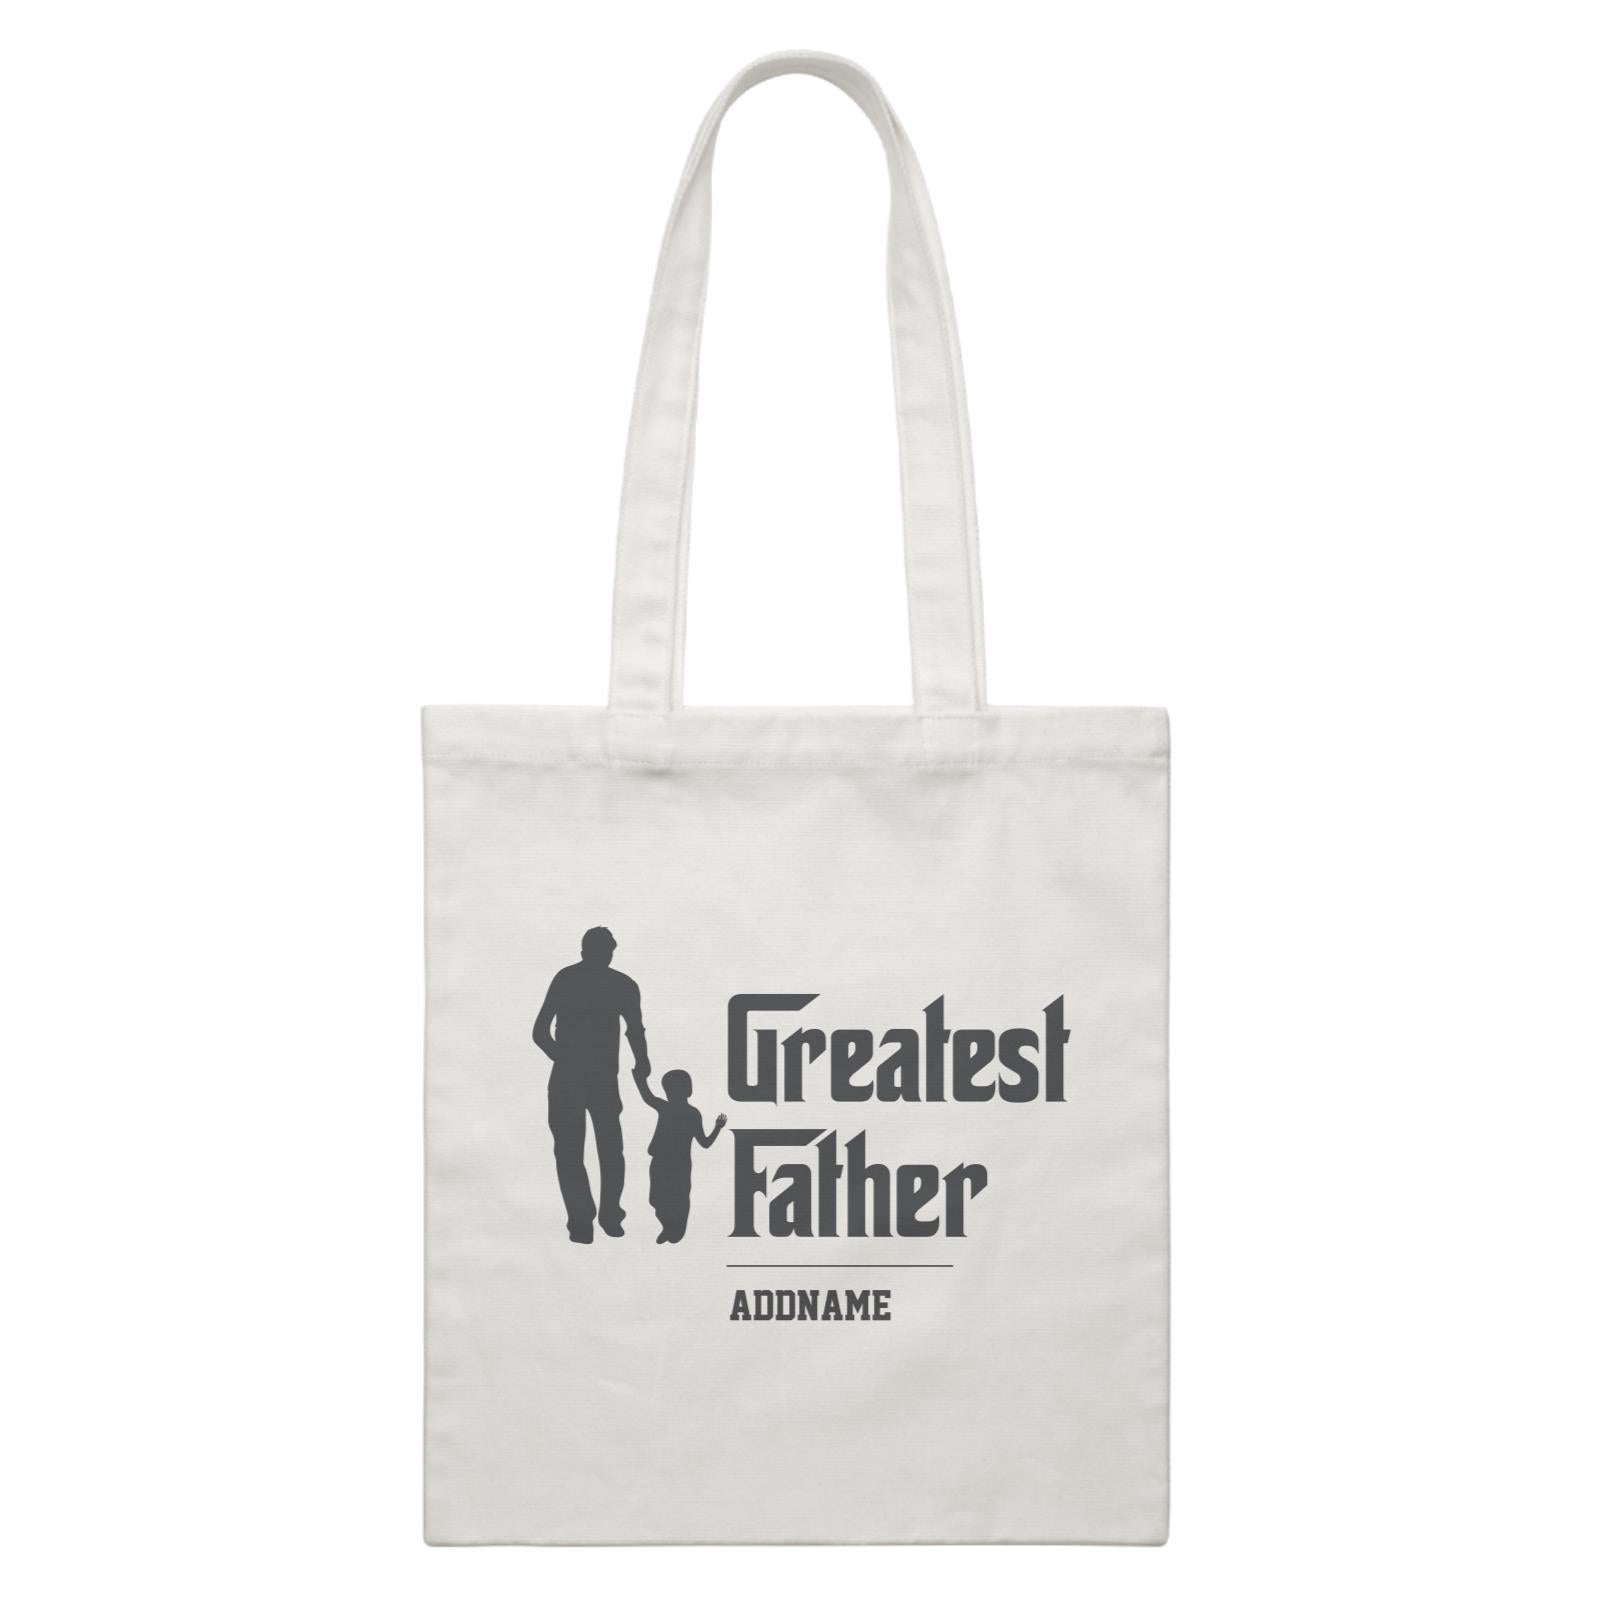 Father & Son Image Greatest Father Addname White Canvas Bag